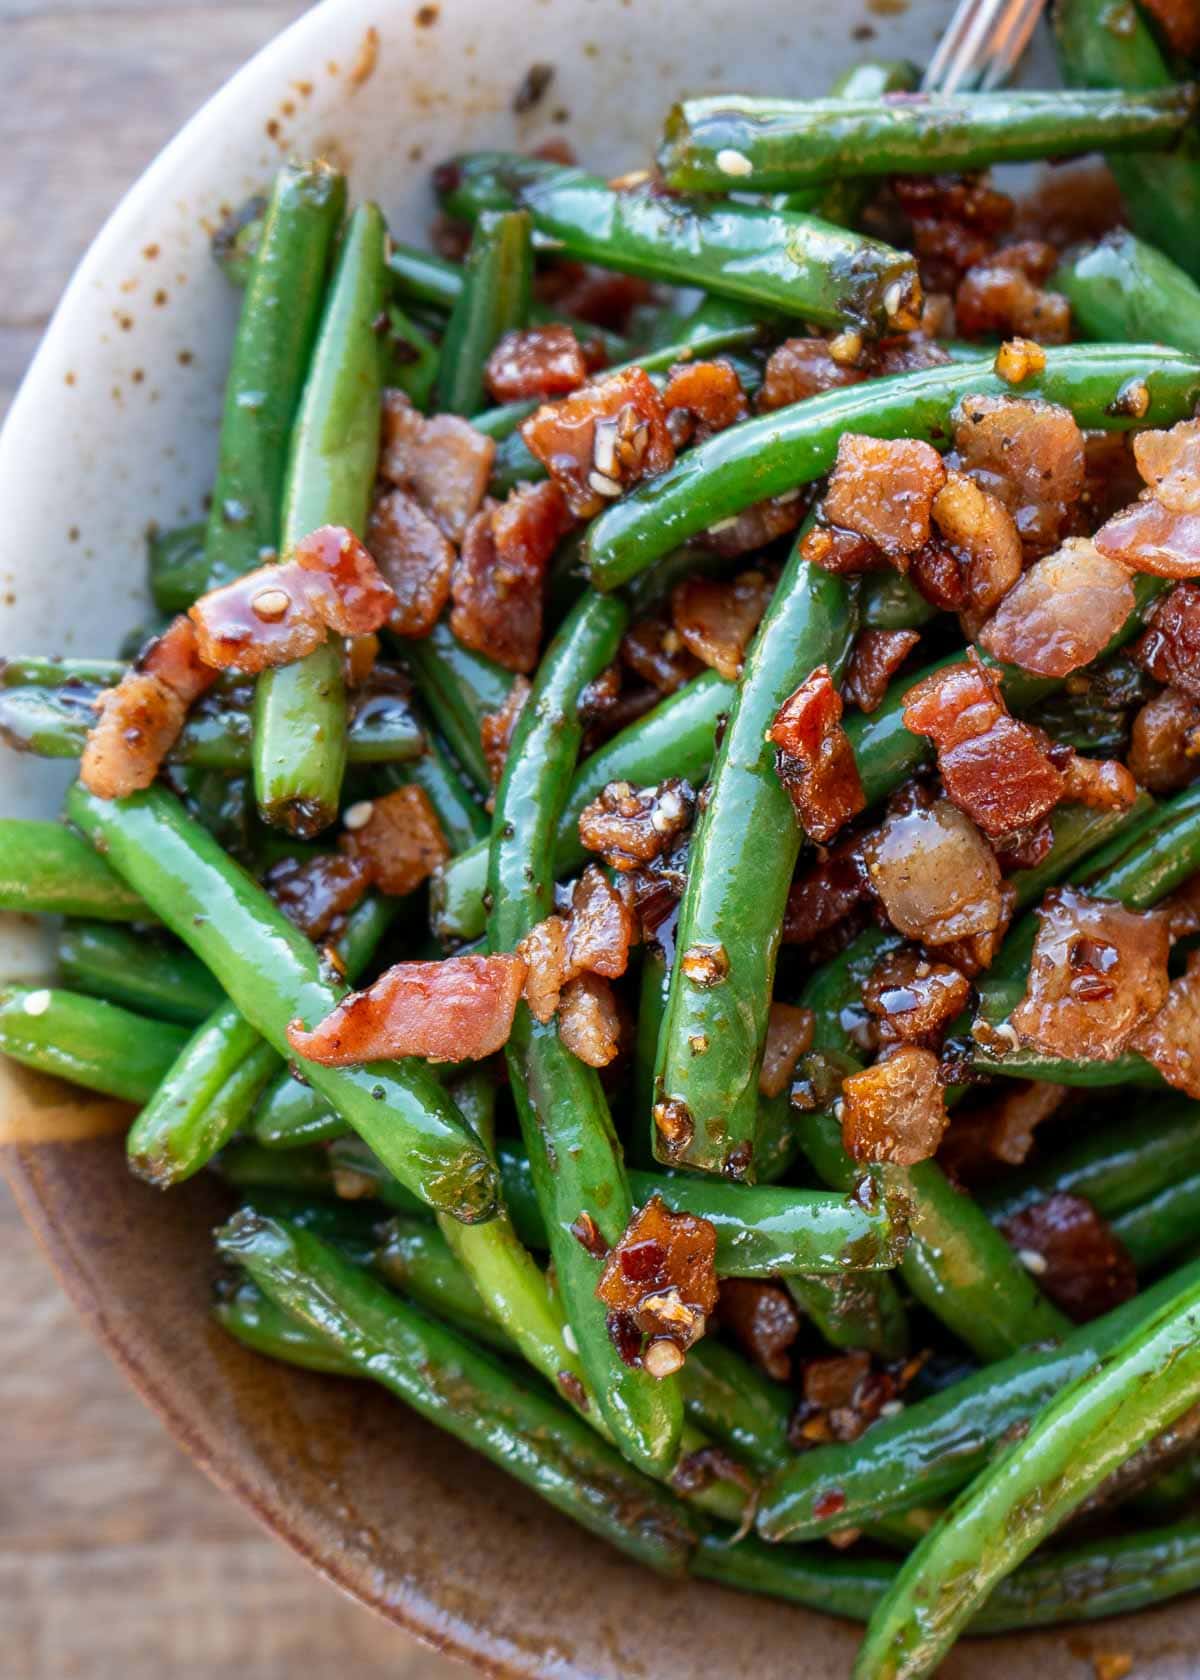 These Sweet and Spicy Green Beans will be your new favorite keto side dish! This easy recipe is ready in just 20 minutes and has just 5 net carbs per serving.